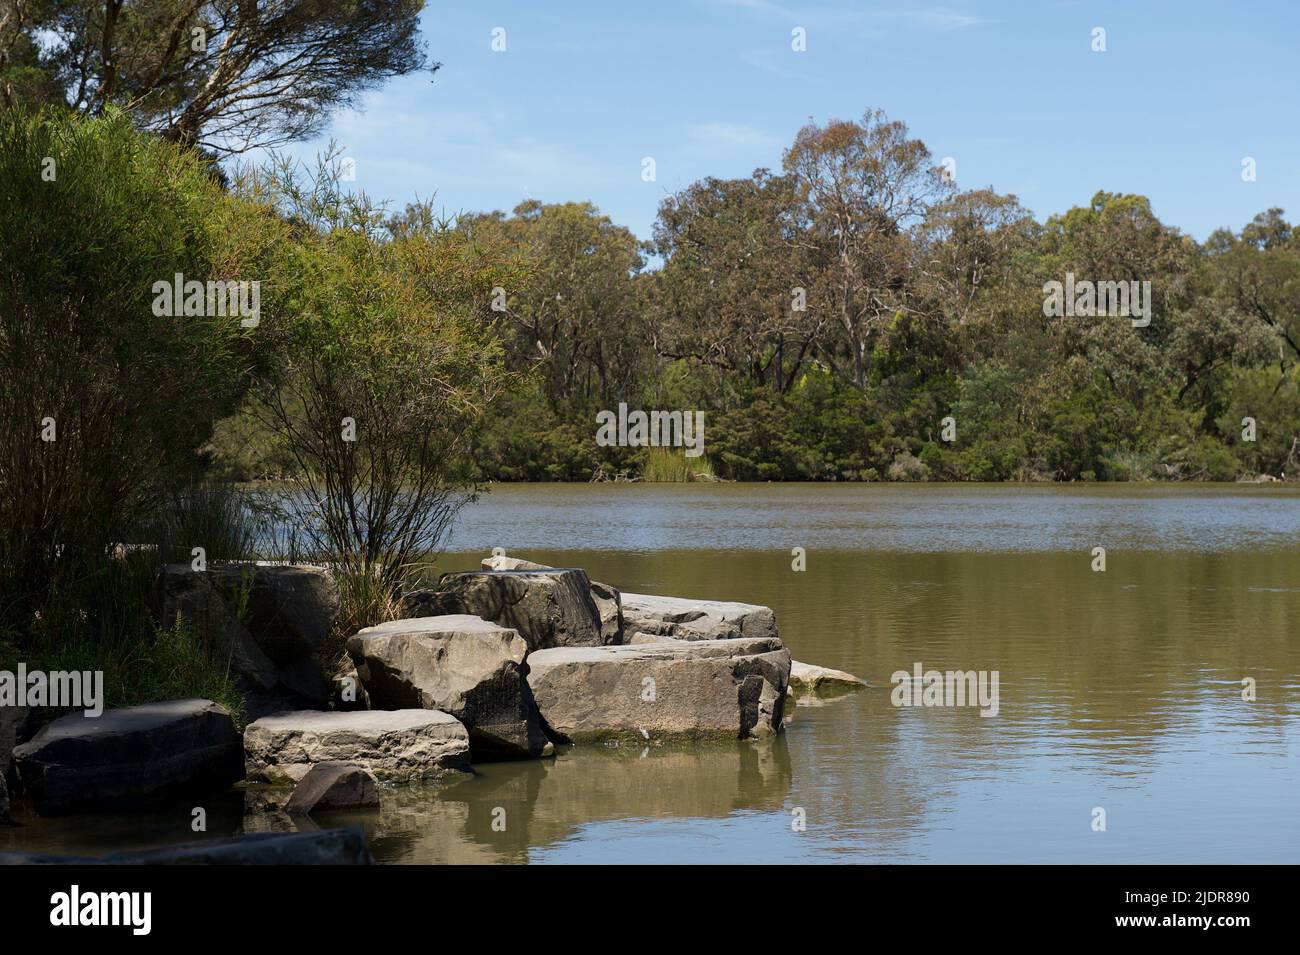 With views like this, Blackburn Lake Reserve is a popular attraction in the Eastern suburbs of Melbourne in Victoria, Australia. Stock Photo